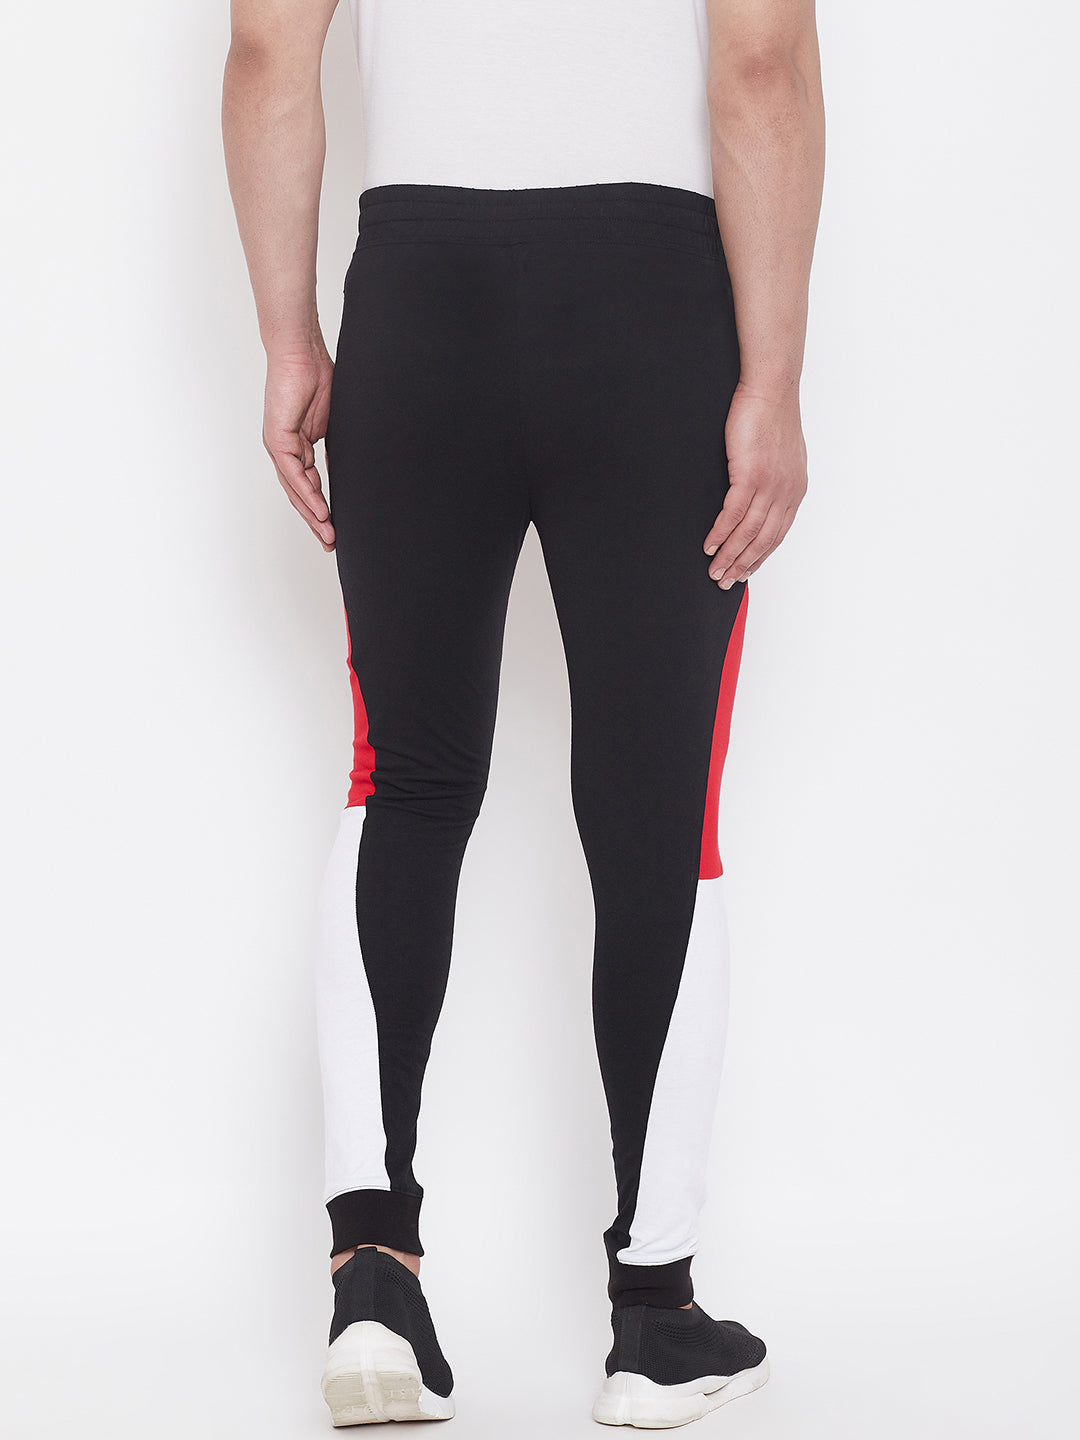 Black/Red/White Men'S Slim Fit Joggers With Color Block